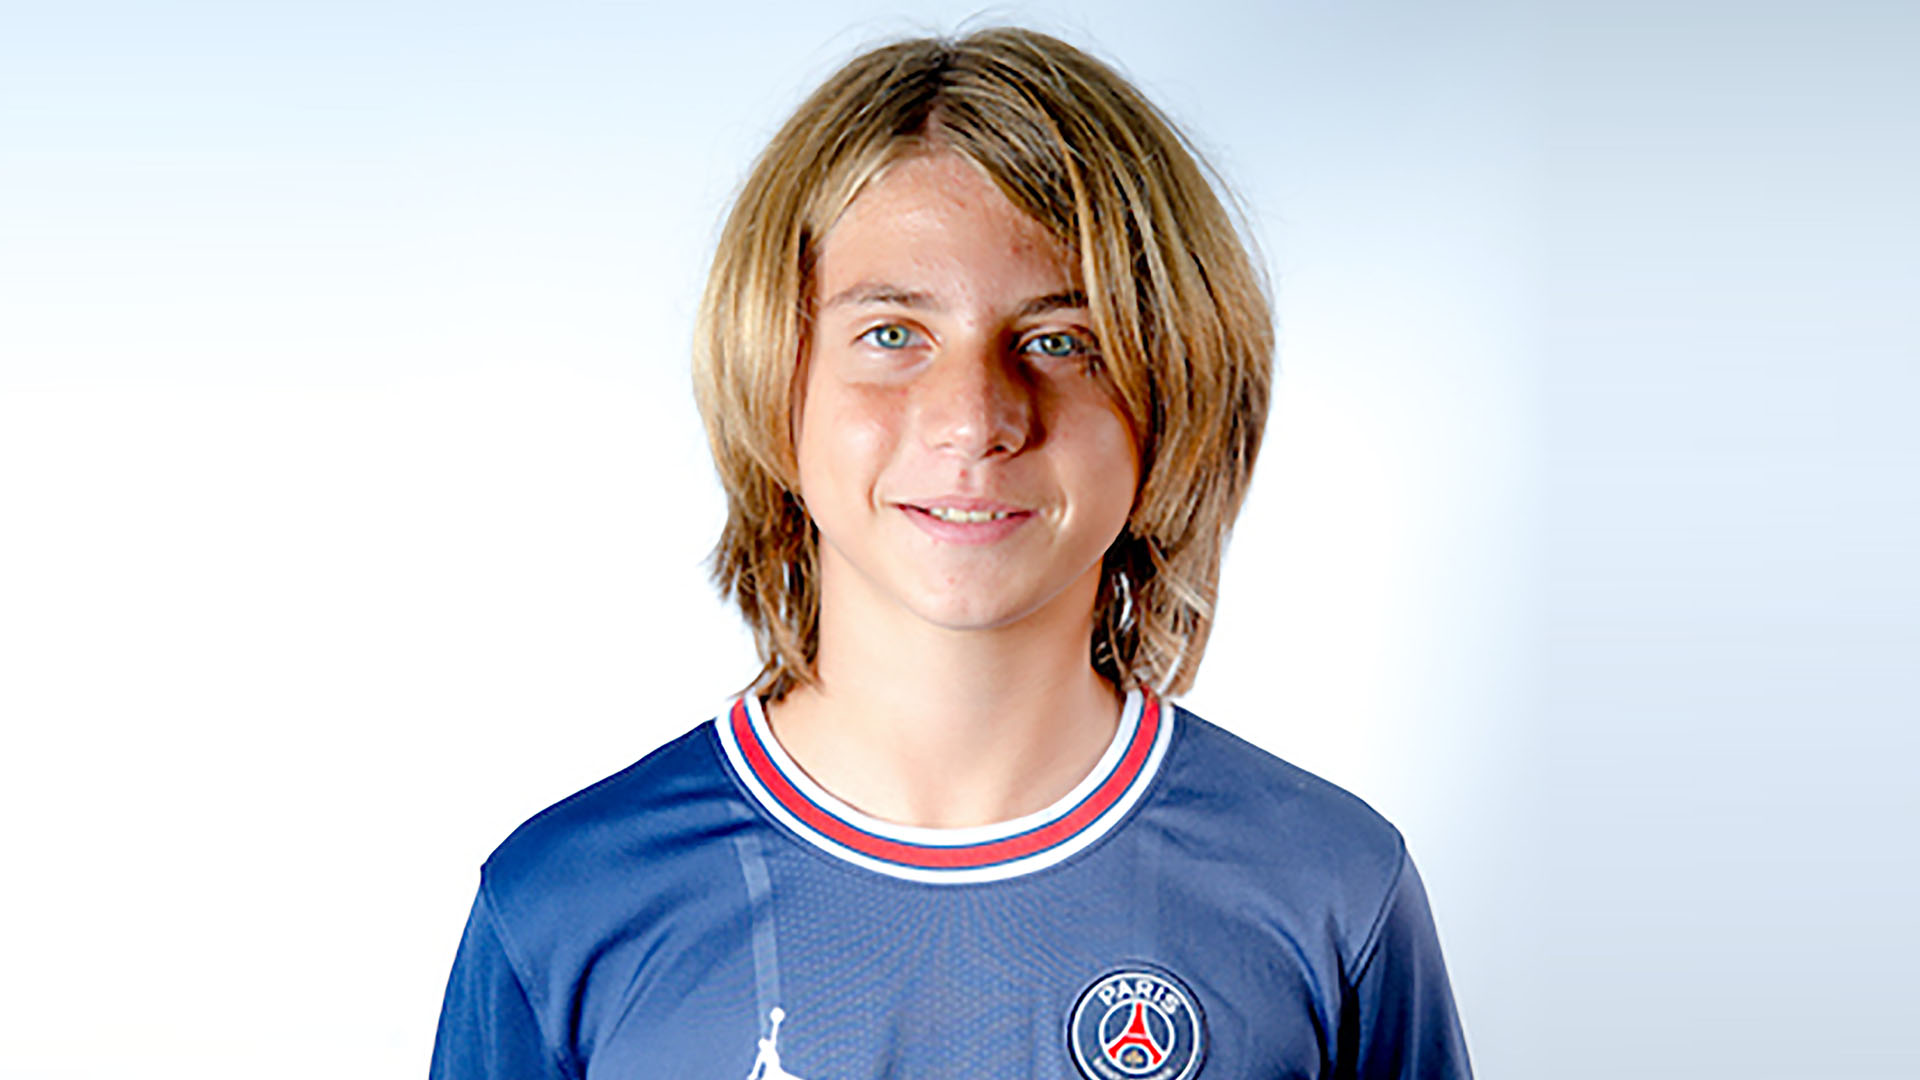 The impressive mark that the eldest son of Maxi Lopez and Wanda Nara reached on PSG U13 his best plays - Infobae